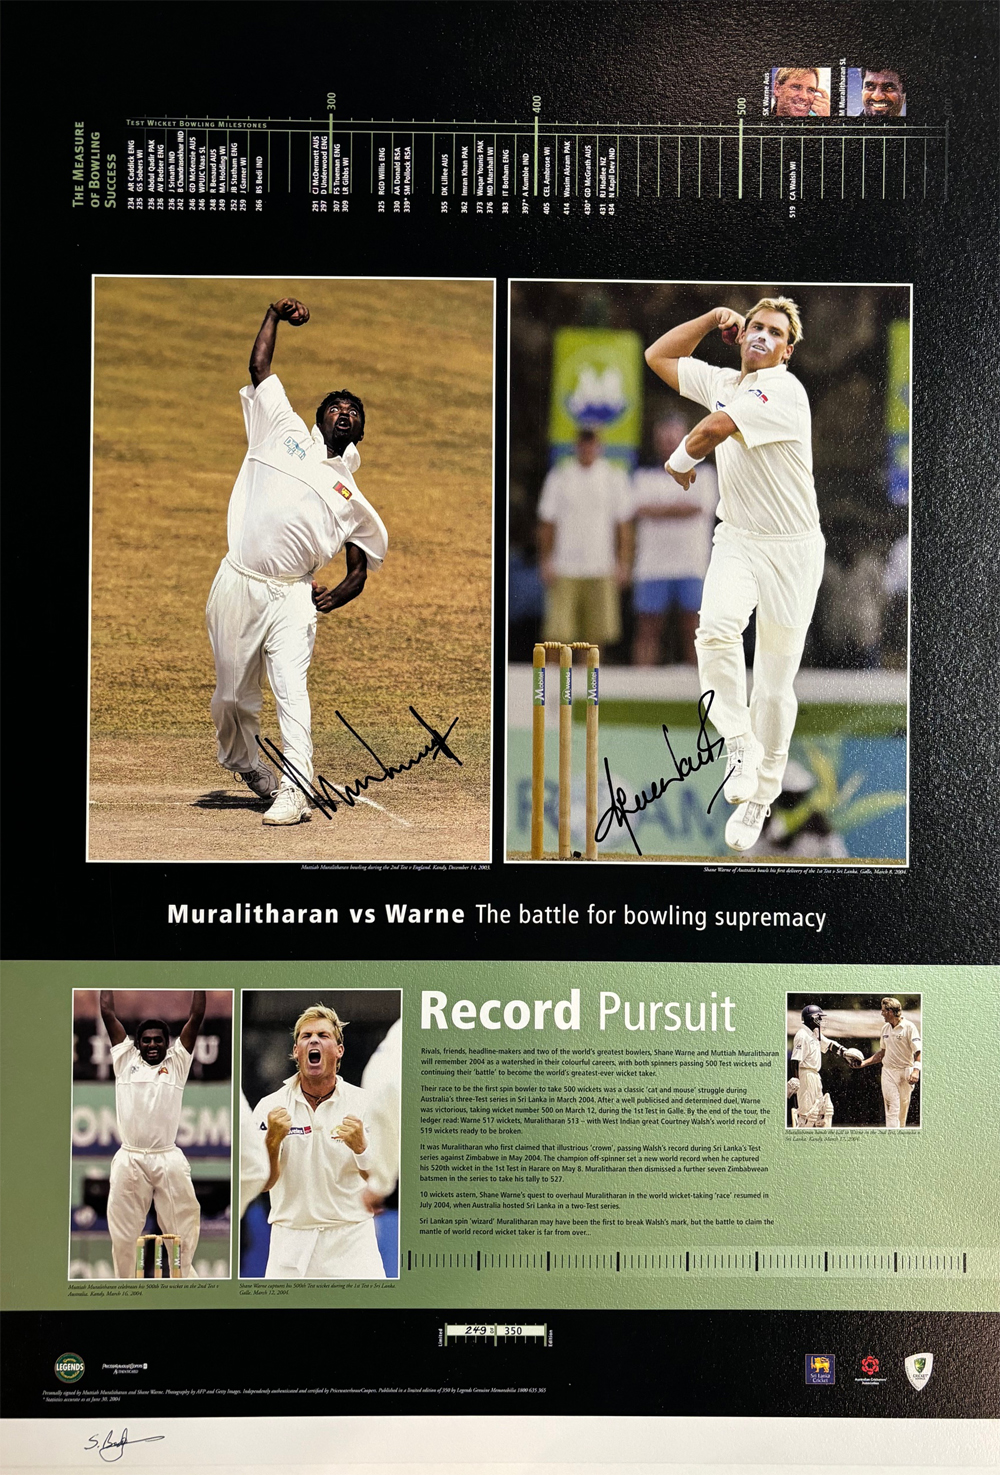 Shane Warne & Muttiah Muralitharan signed Limited Edition Lithograph with COA This absolutely